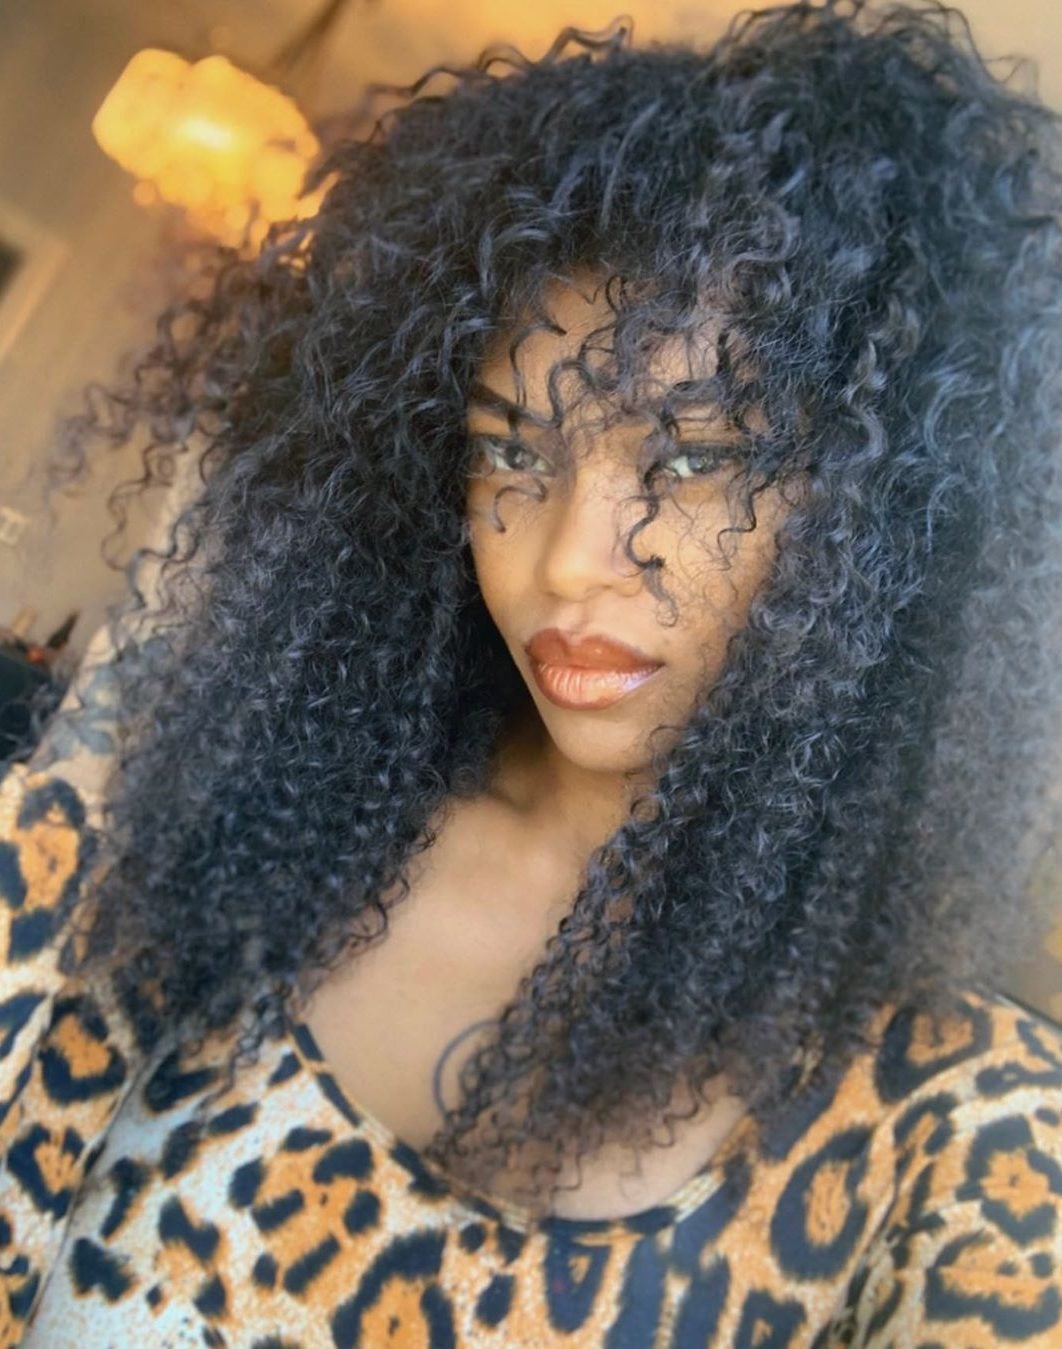 Megan Thee Stallion, Laila Ali And Other Celebrity Beauty Photos Of The Week